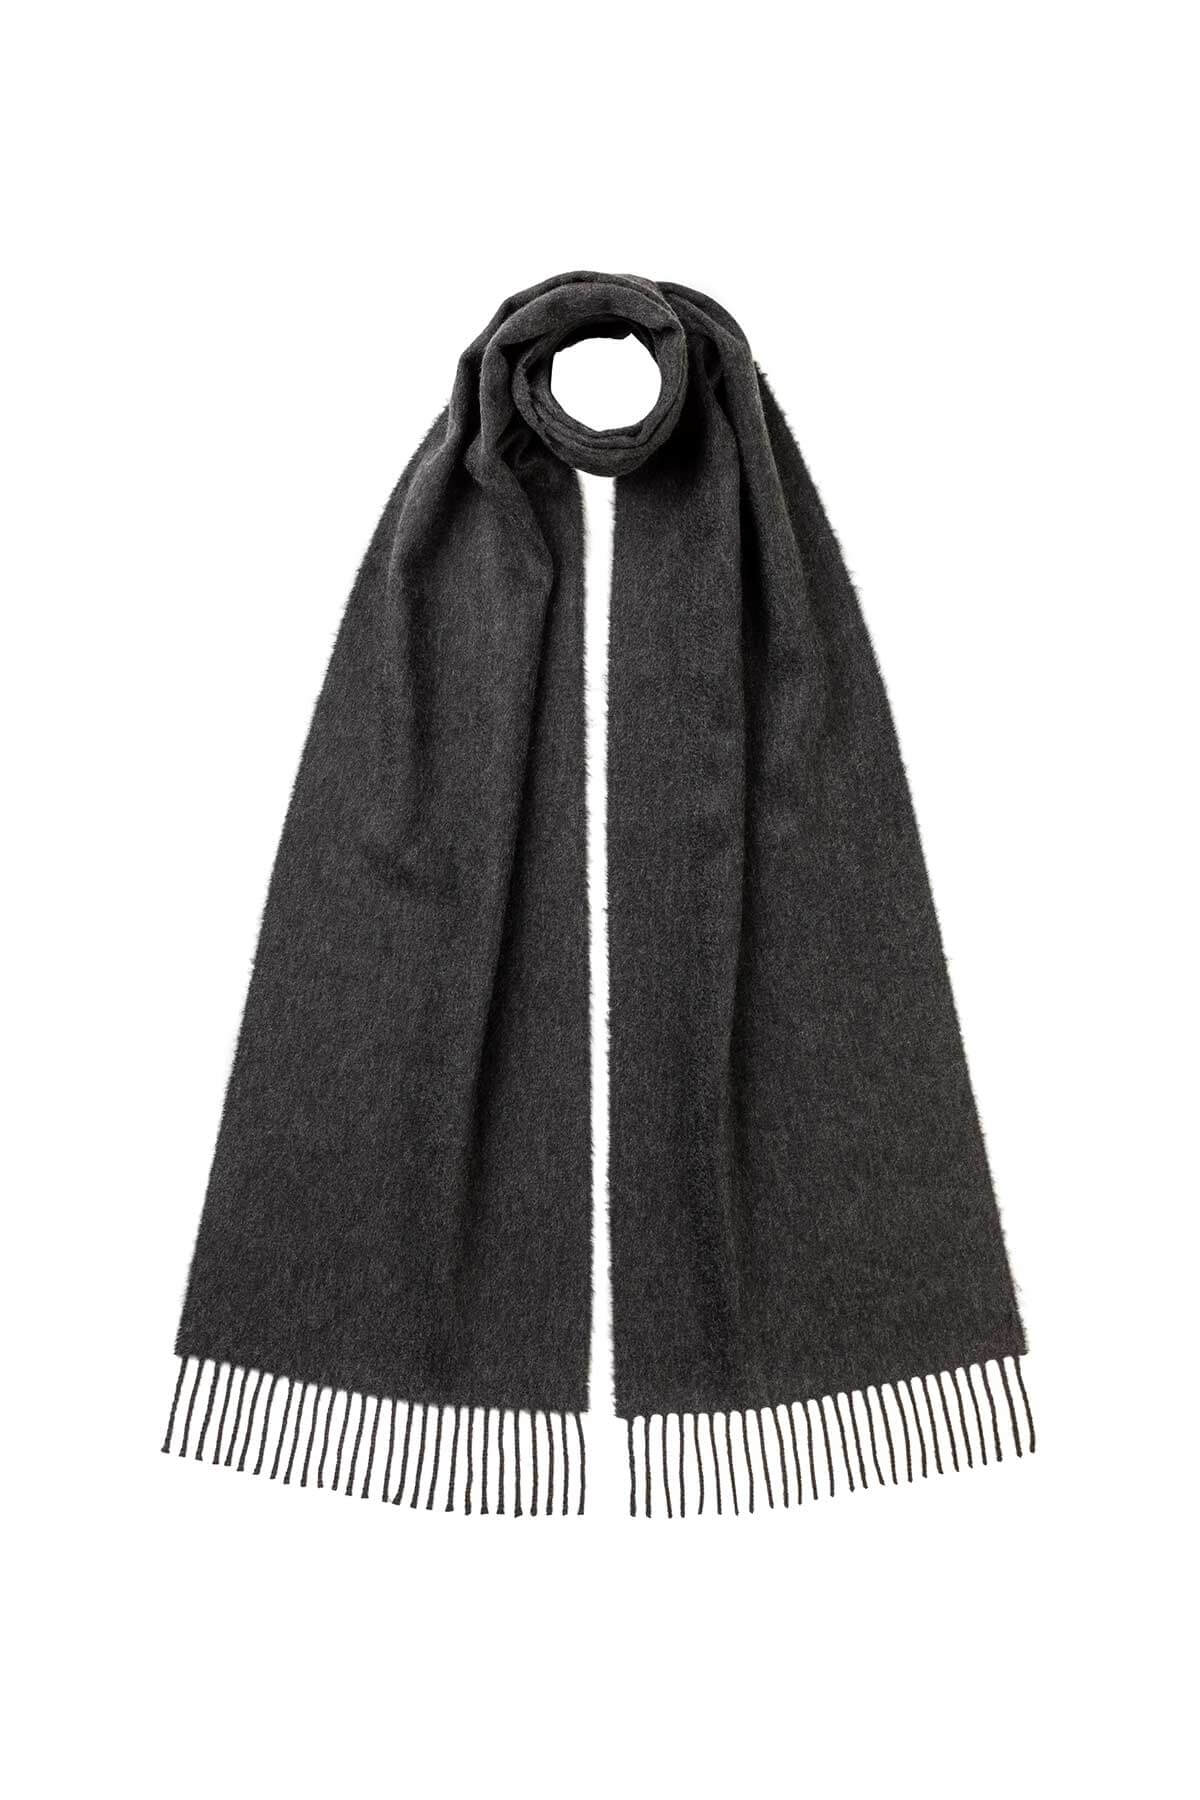 Johnstons of Elgin Cashmere Scarf in Charcoal on a white background WA000016HA0700N/A